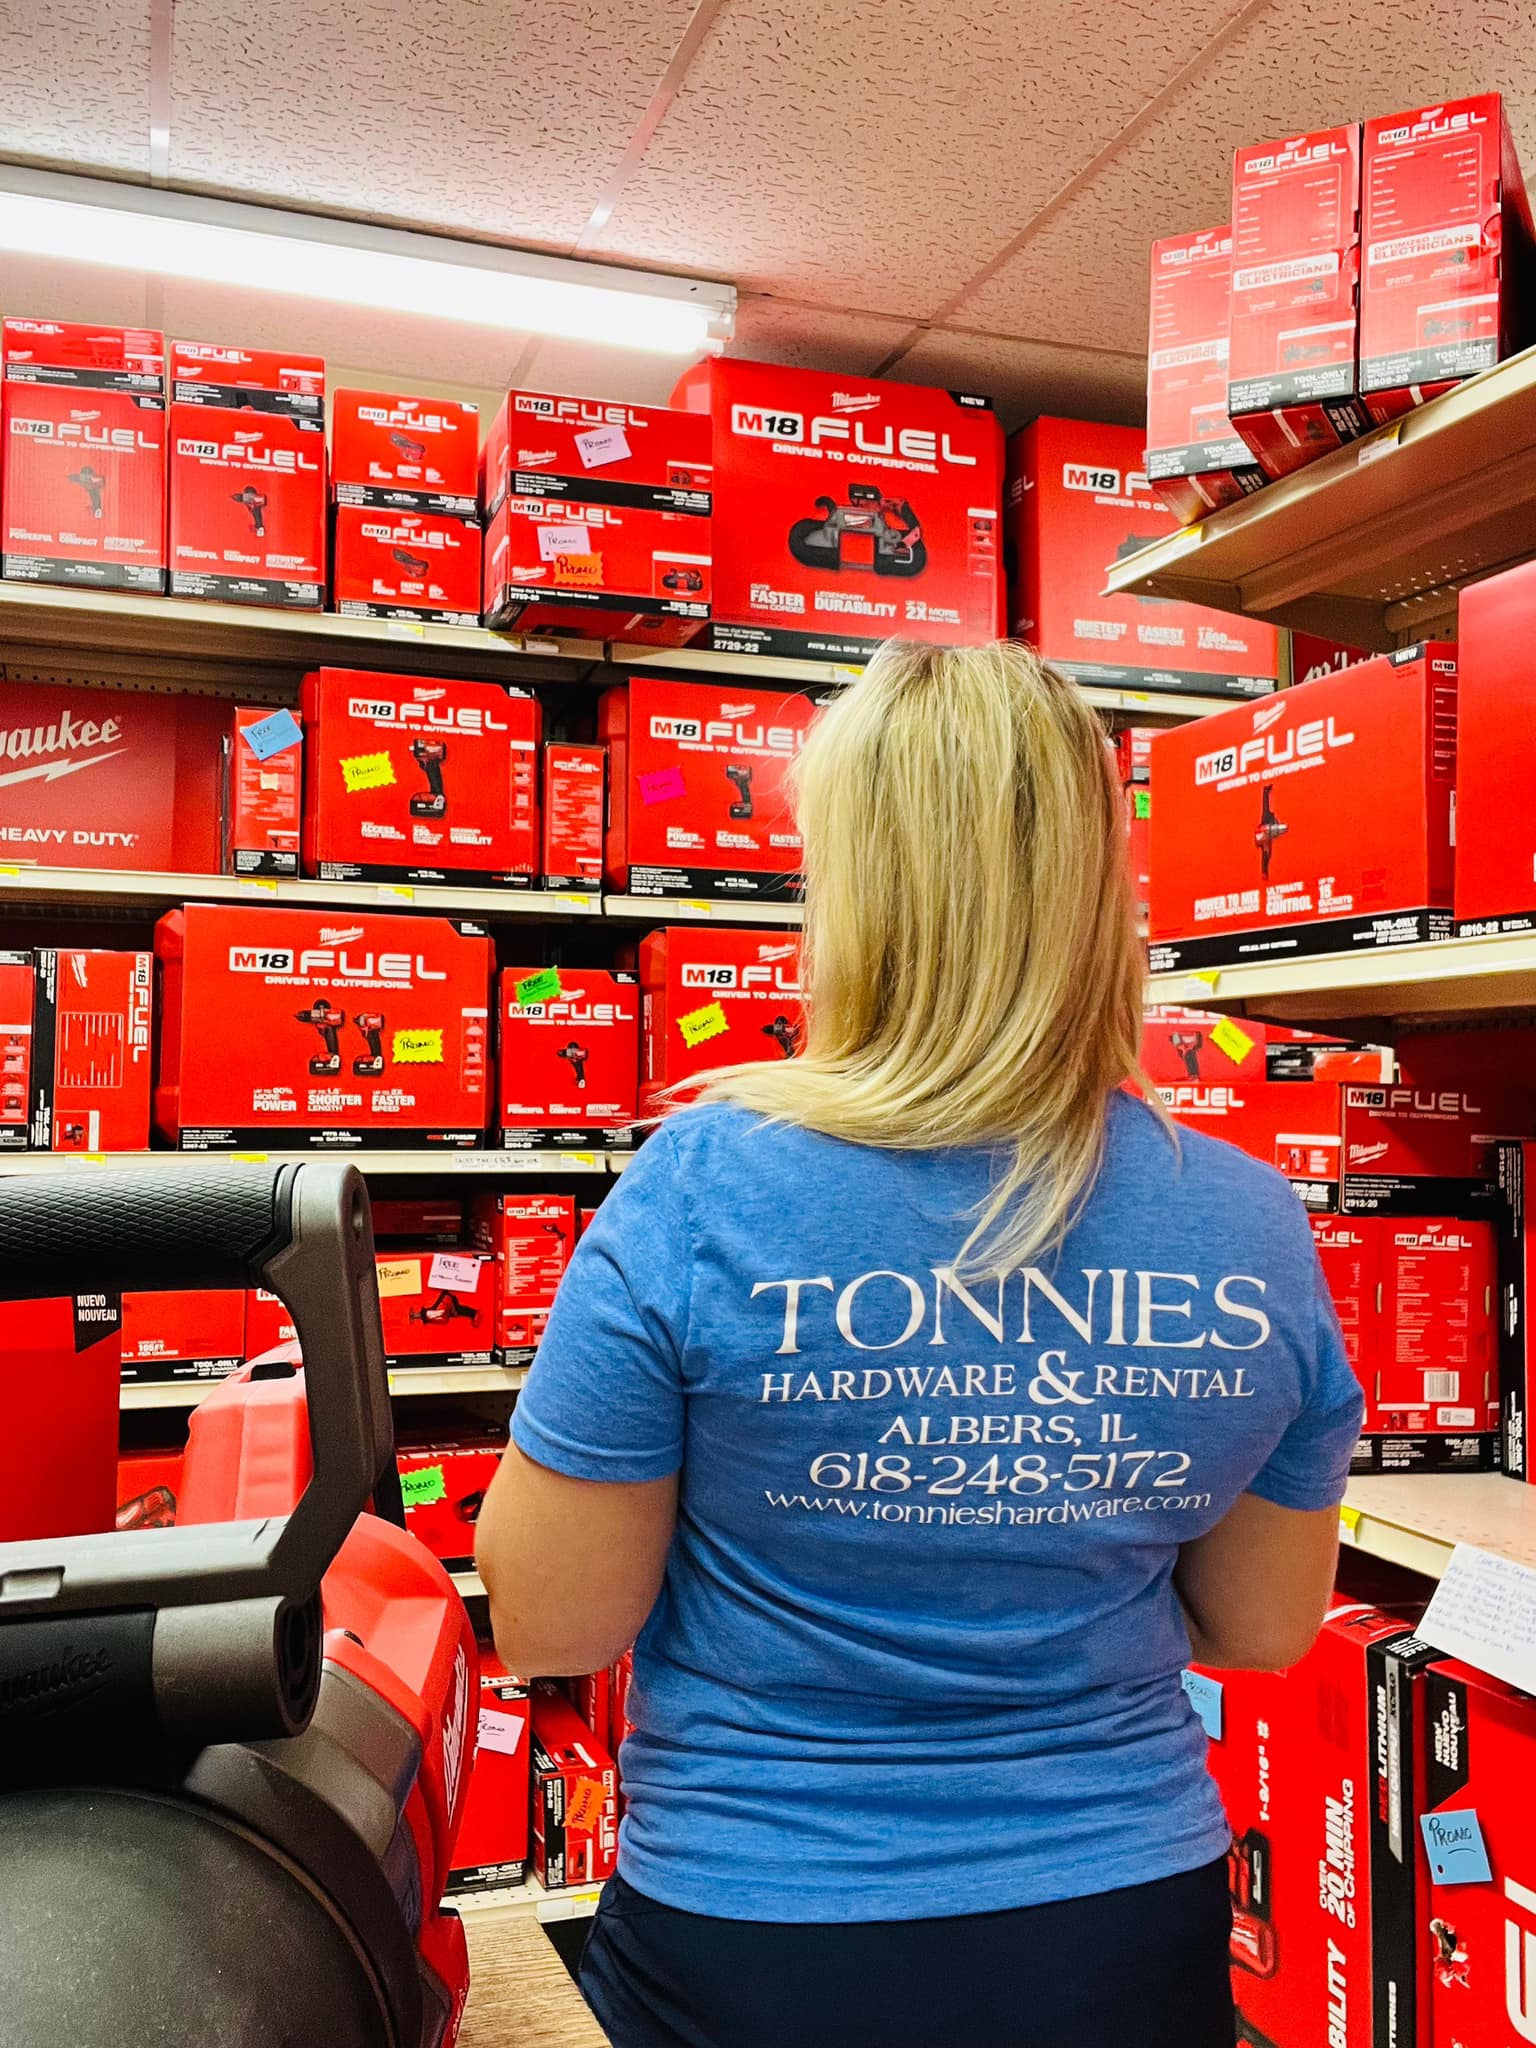 tonnies apparel with tools image